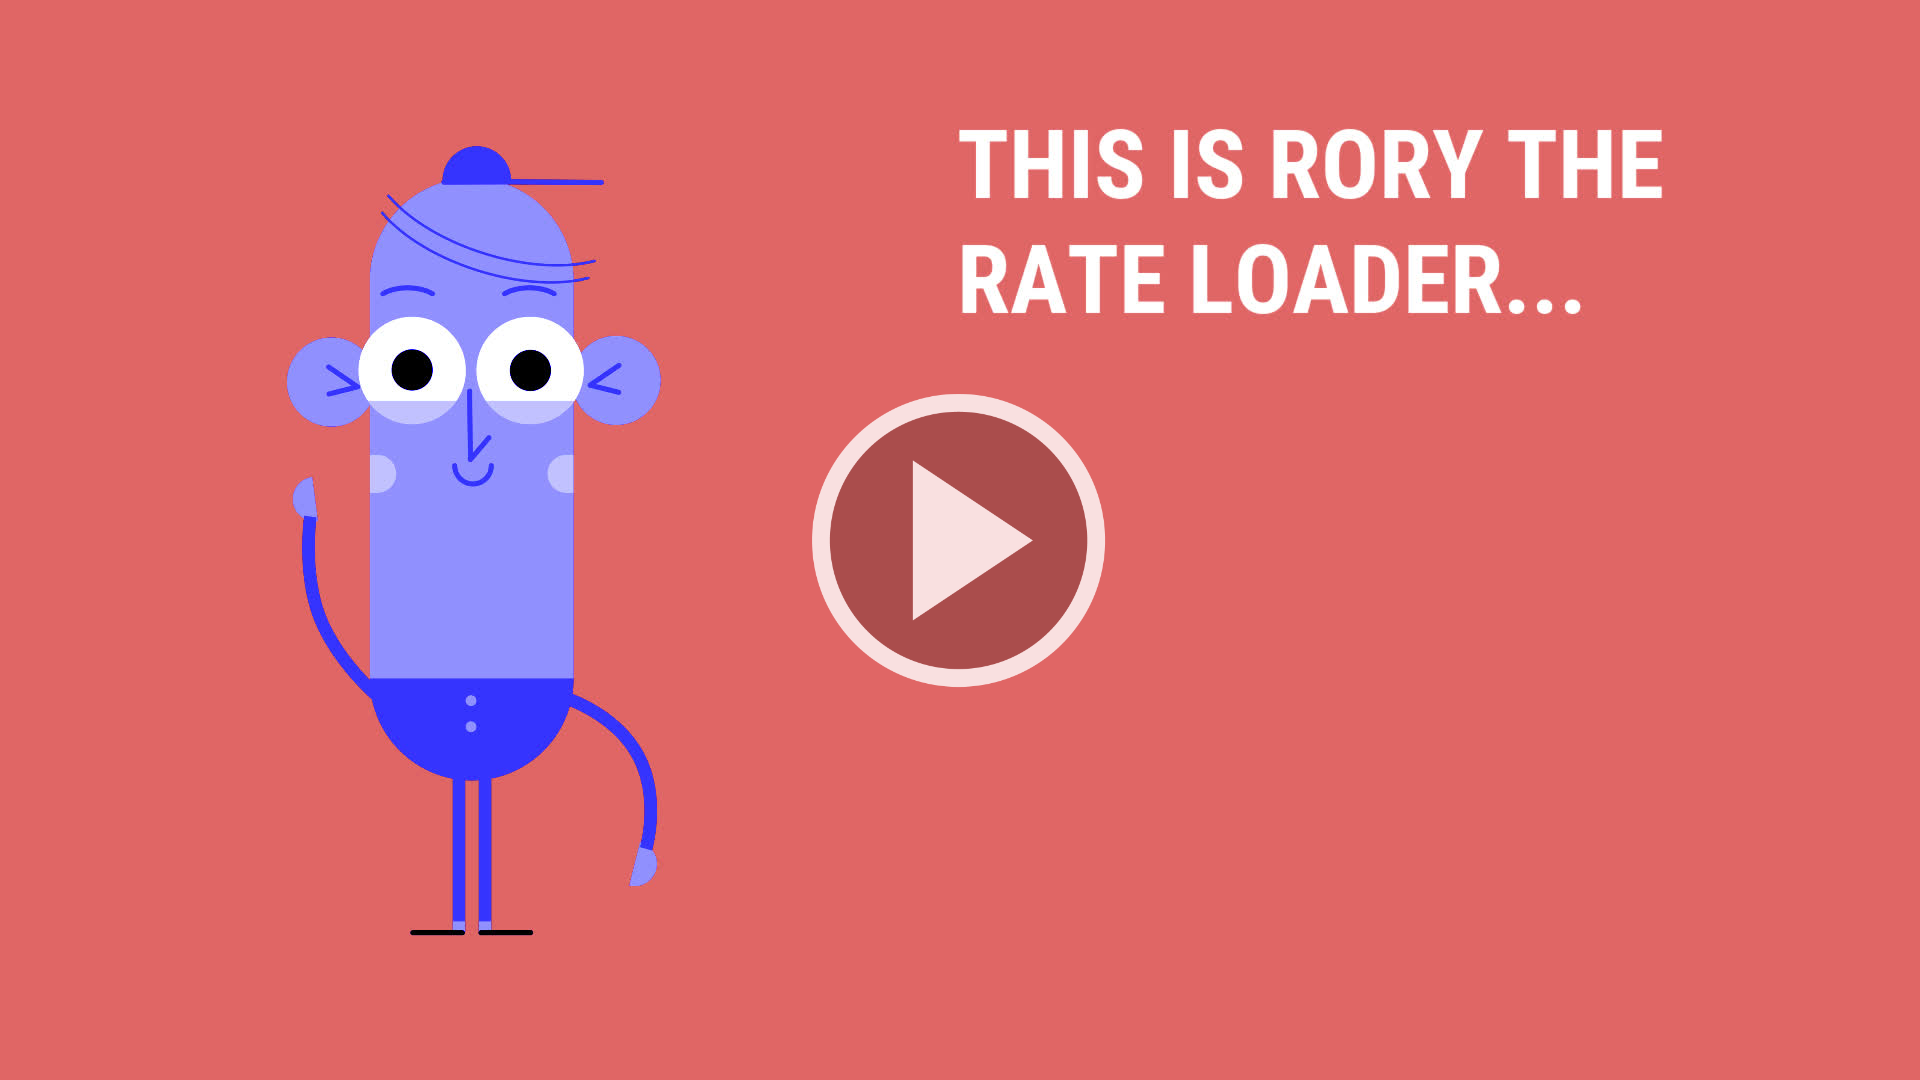 rory the rate loader